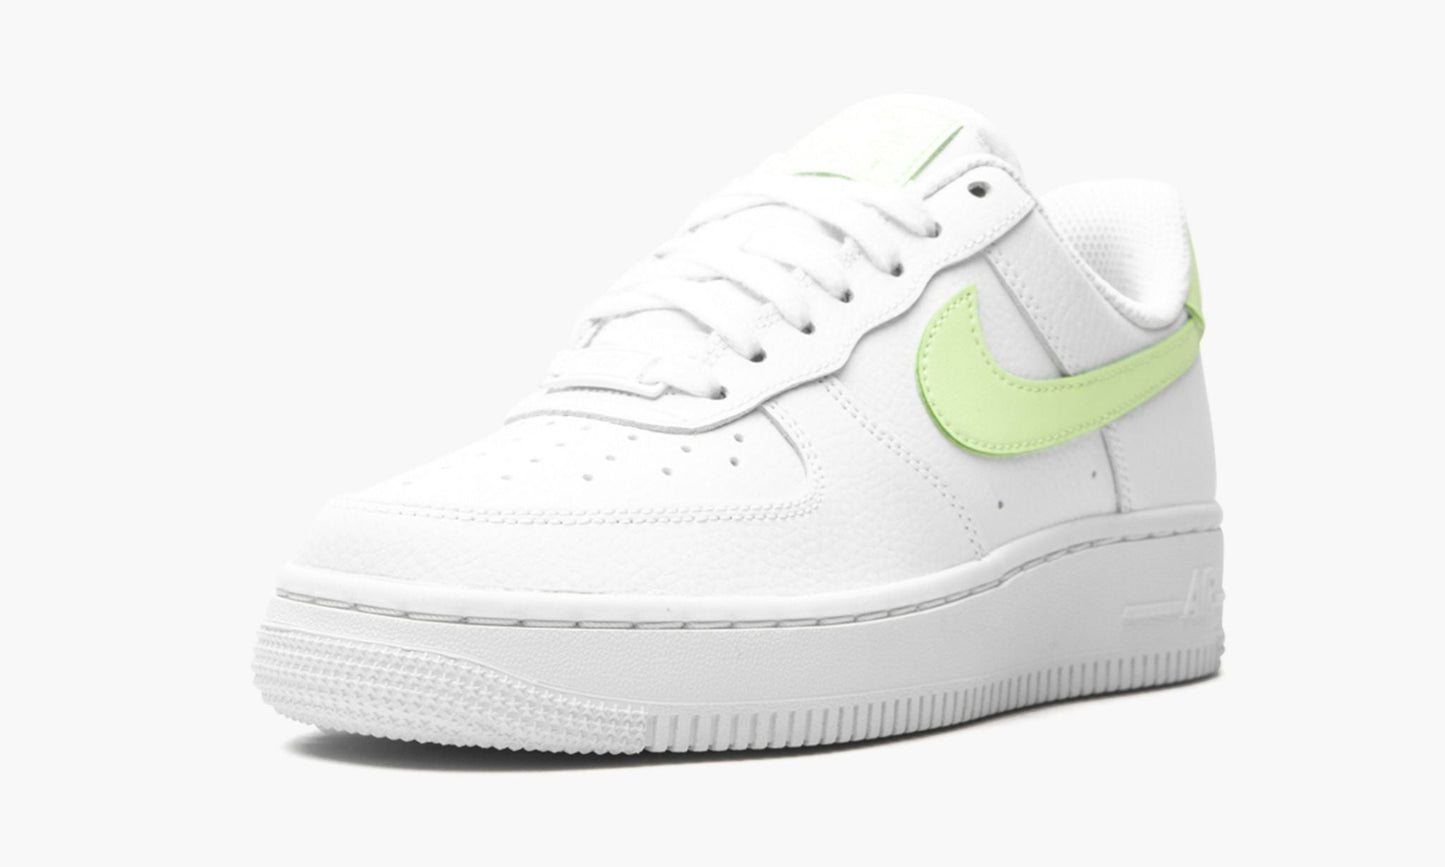 Air Force 1 Low '07 WMNS "White / Barely Volt"